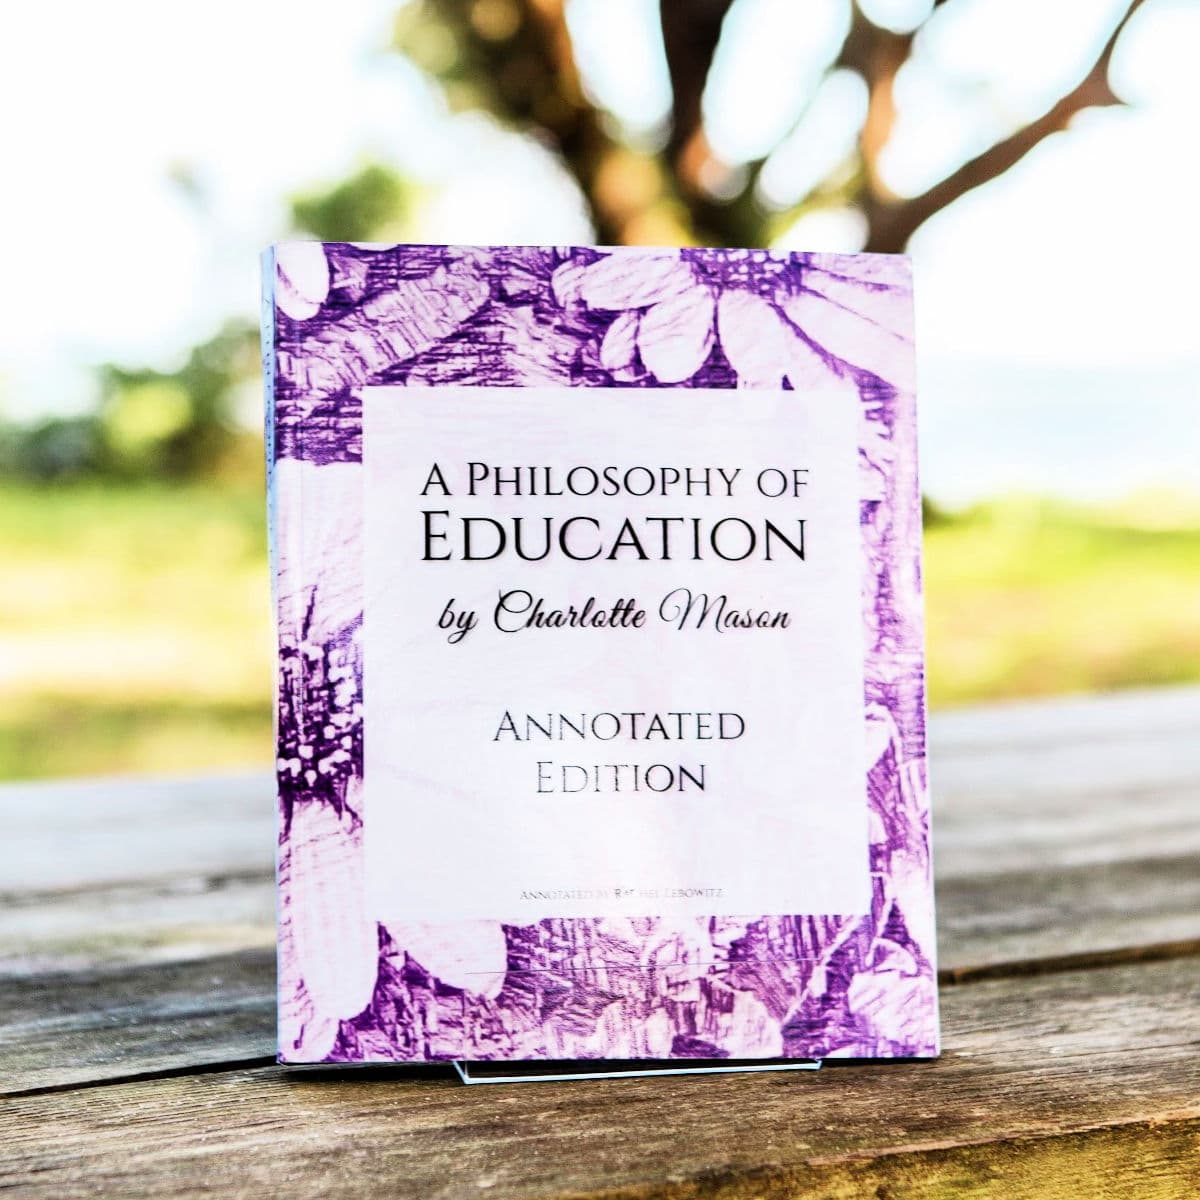 A Philosophy of Education – Volume 6 of The Annotated Charlotte Mason Series